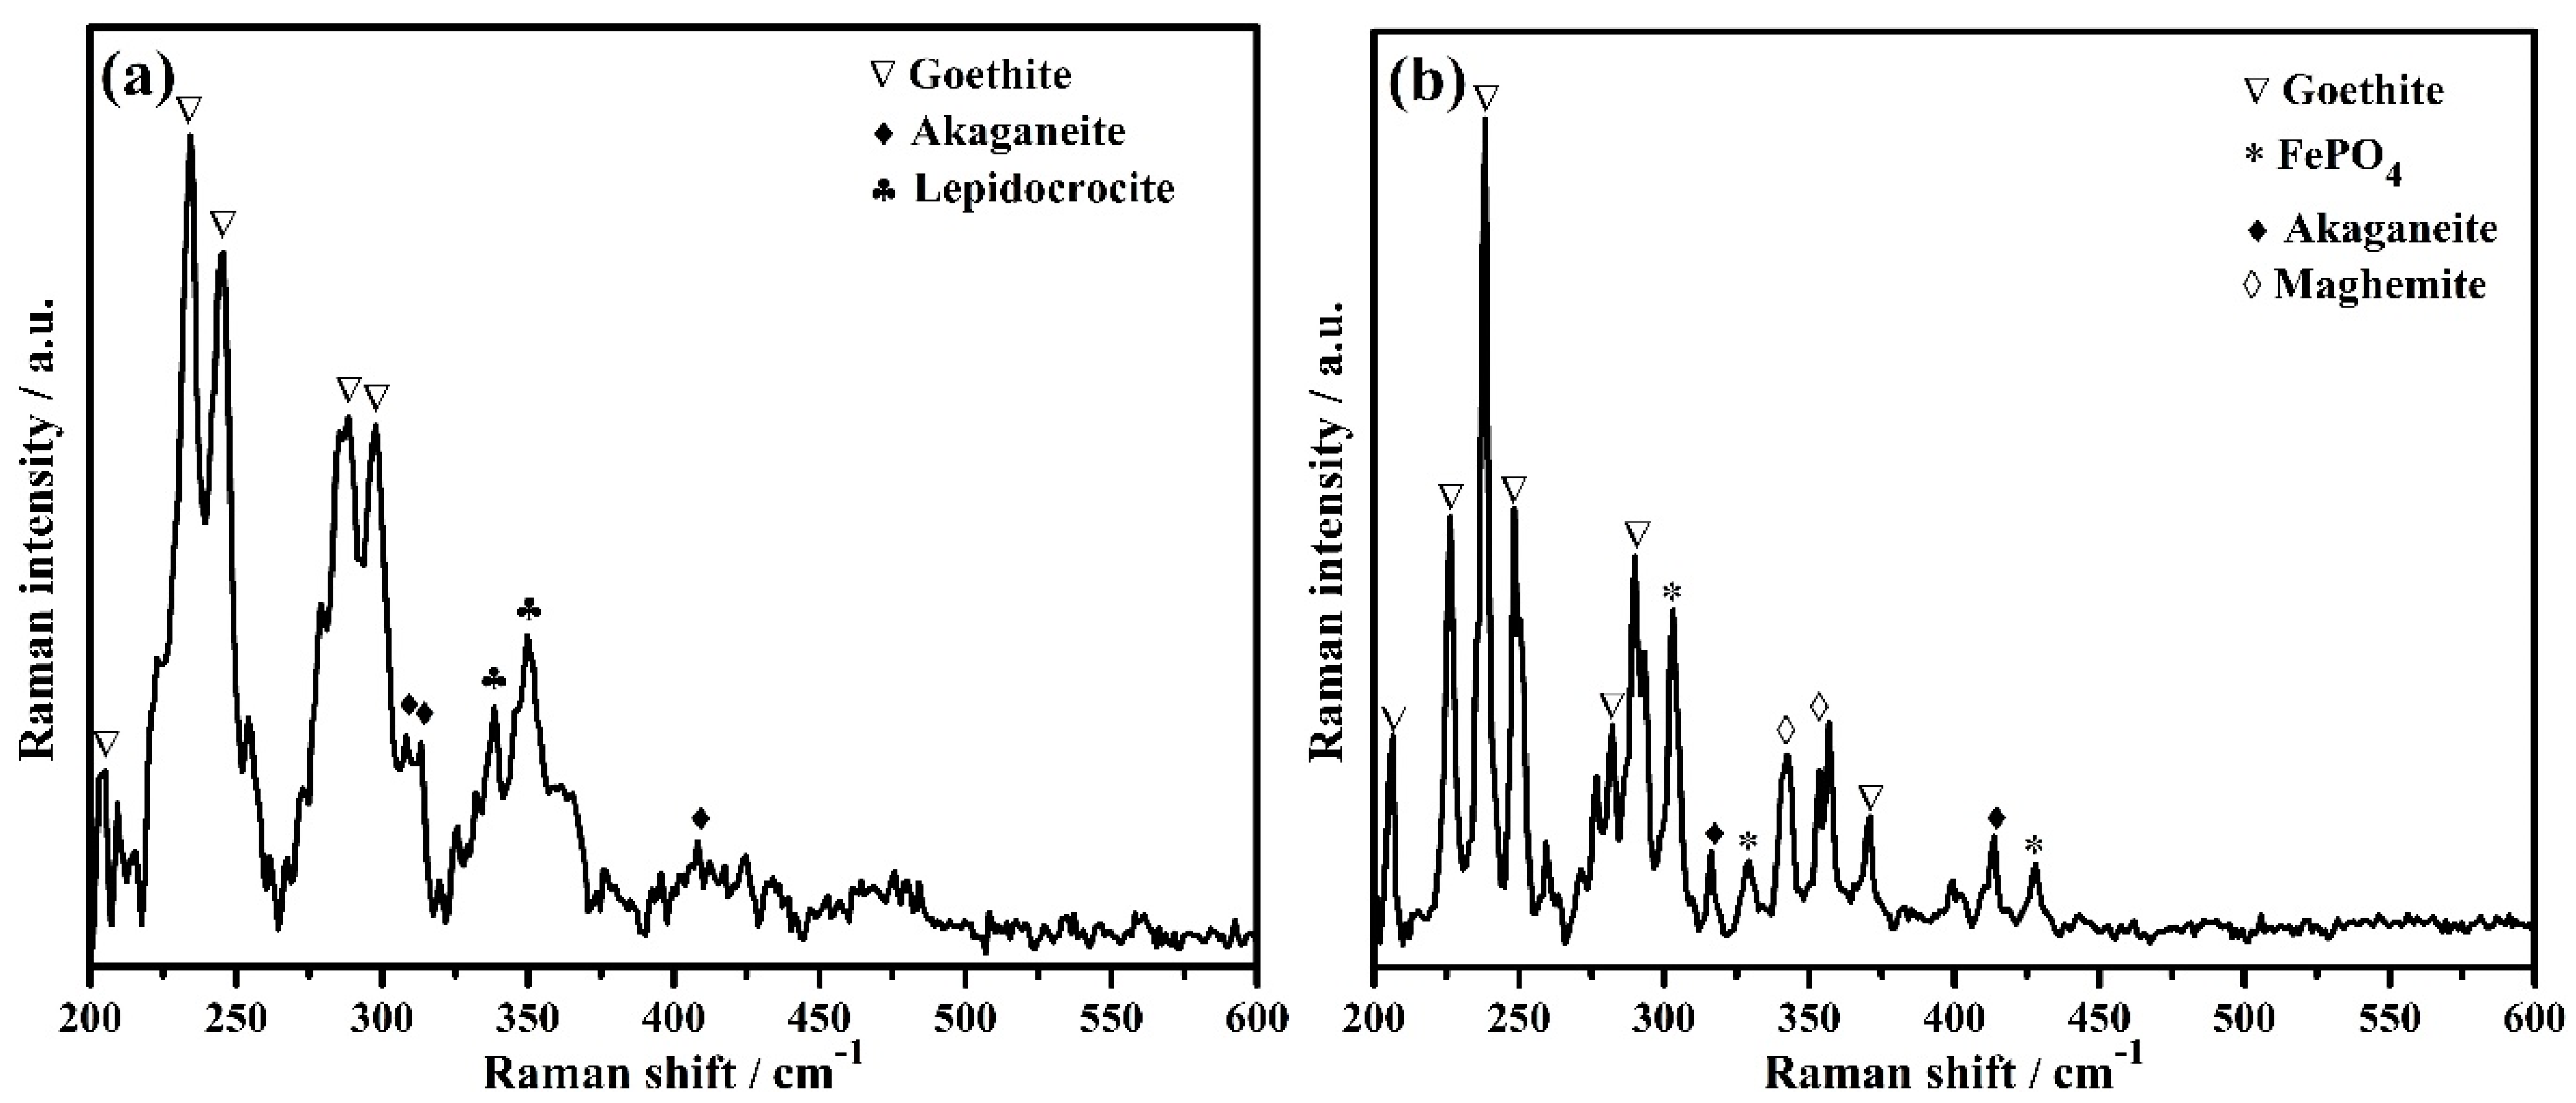 Molecules Free Full Text Ammonium Phosphate As Inhibitor To Mitigate The Corrosion Of Steel Rebar In Chloride Contaminated Concrete Pore Solution Html